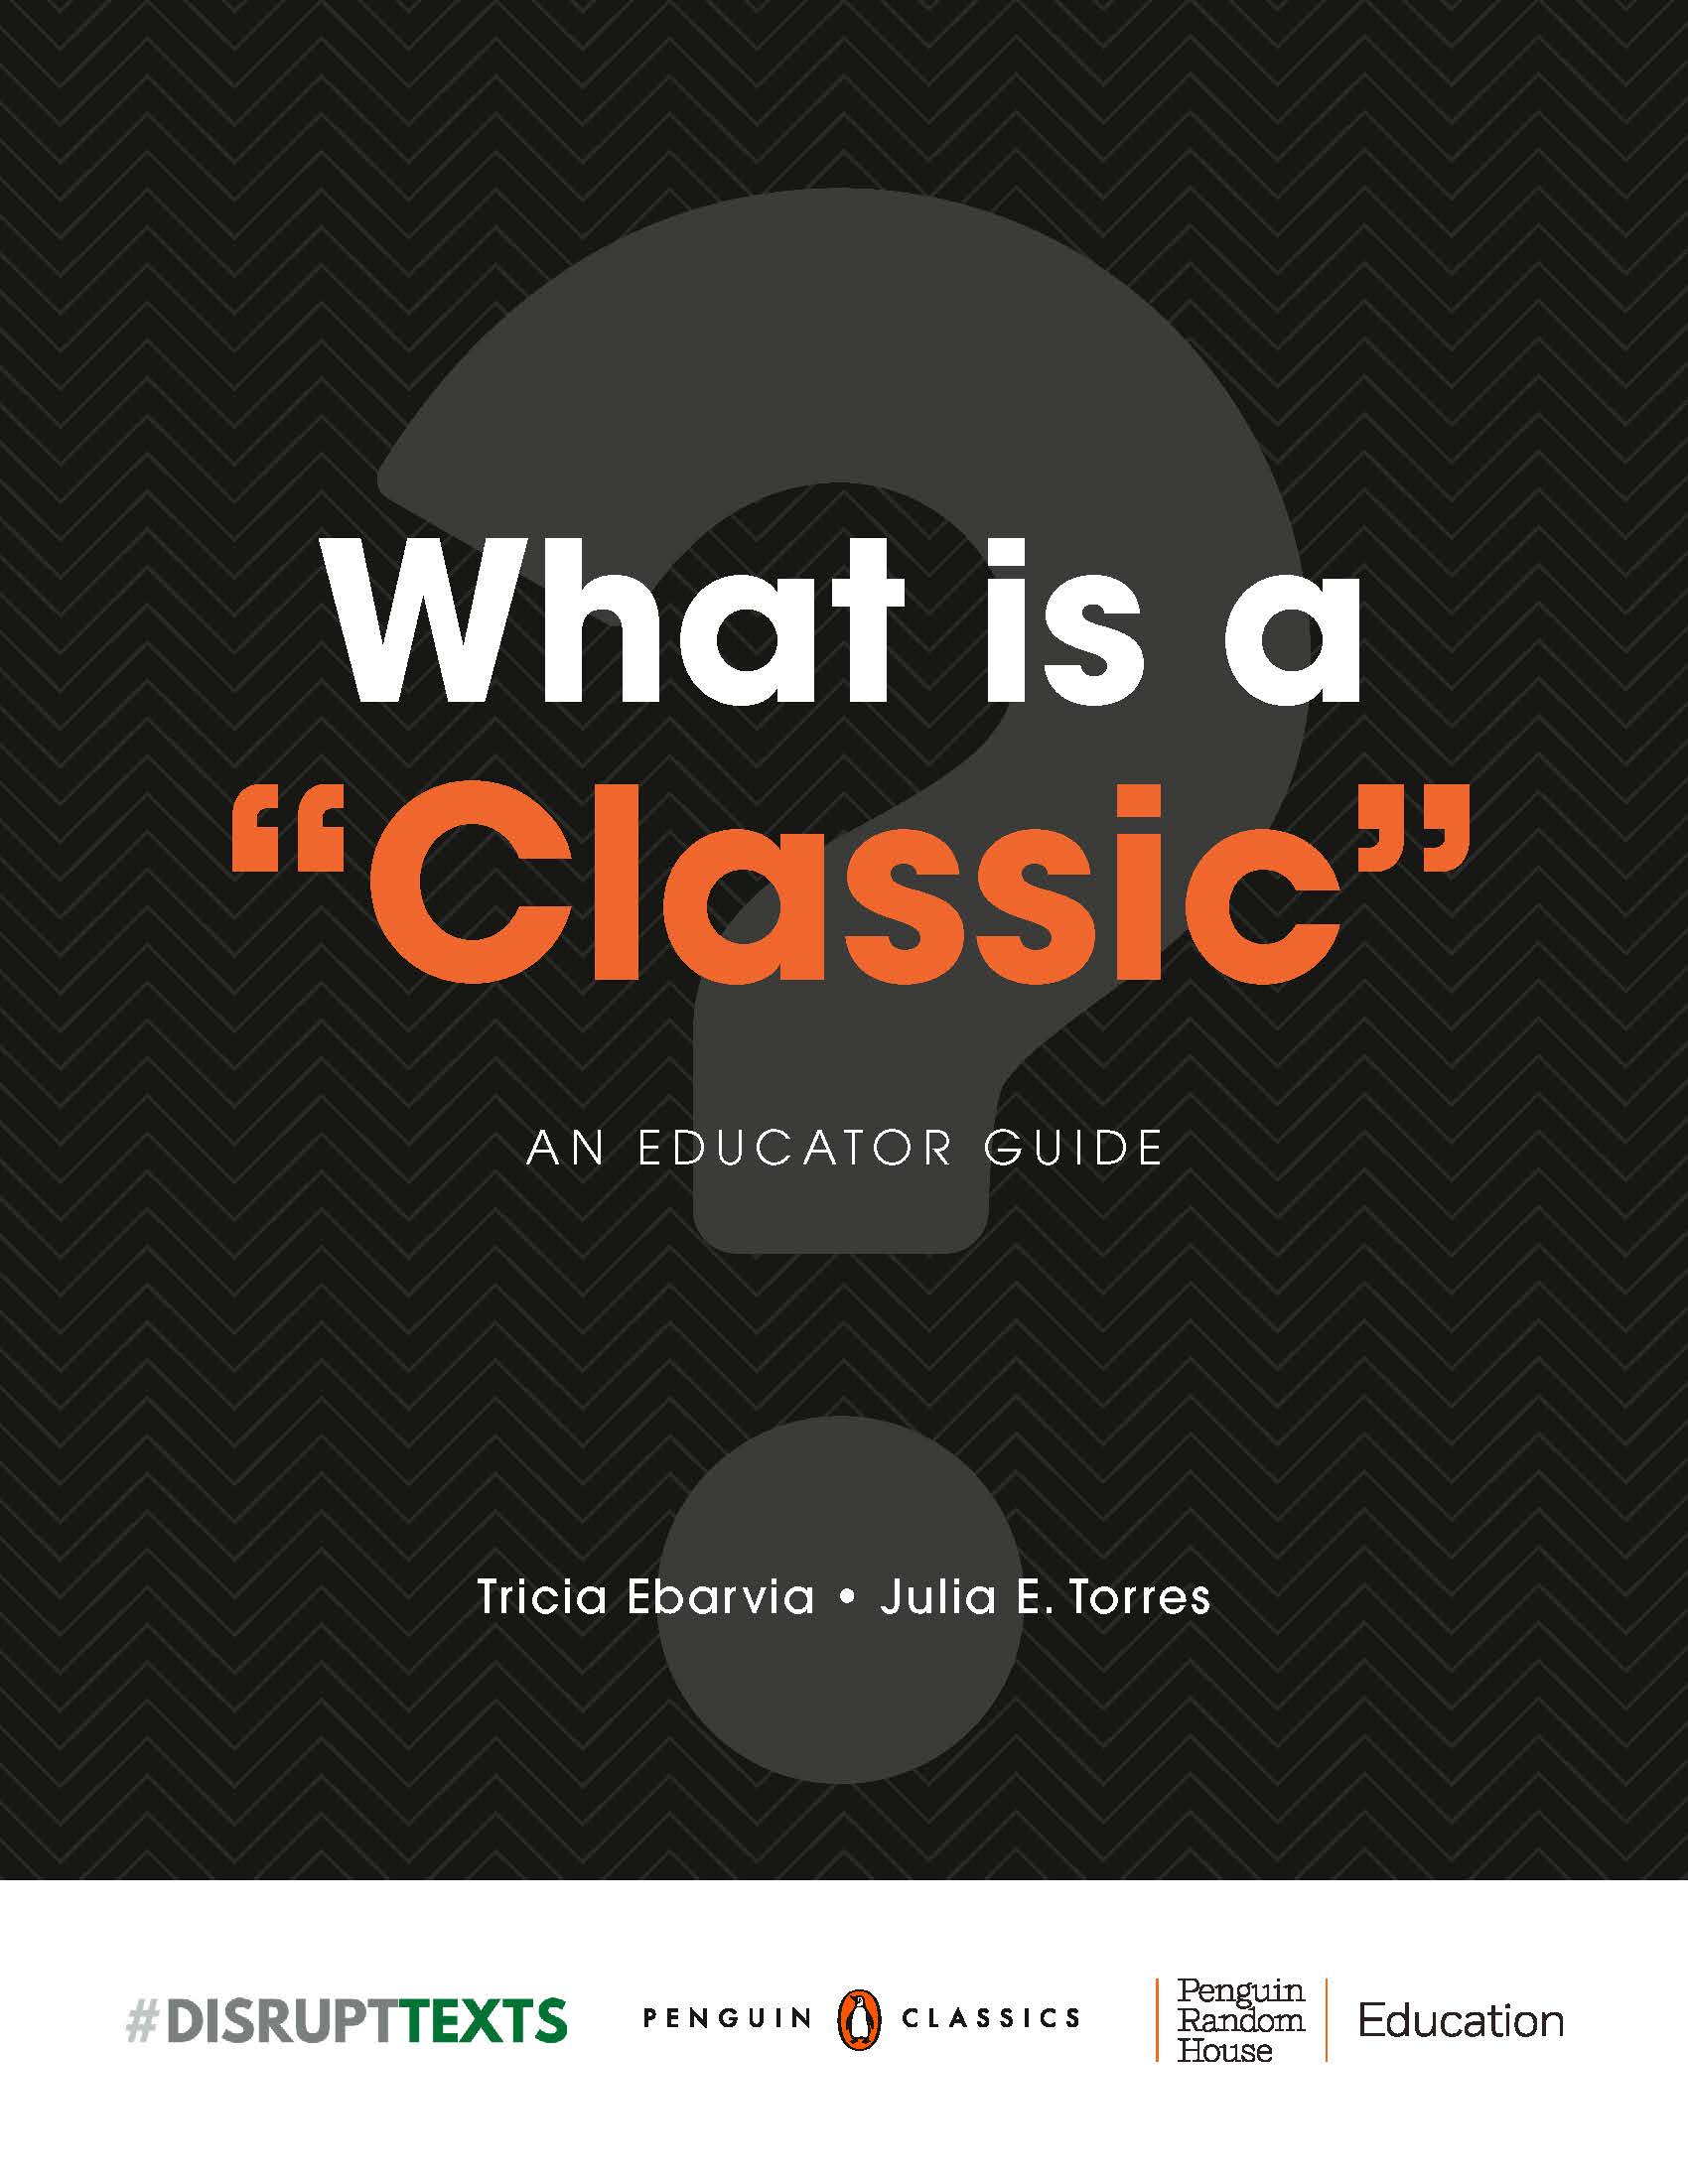 What is a “Classic”: An Educator Guide